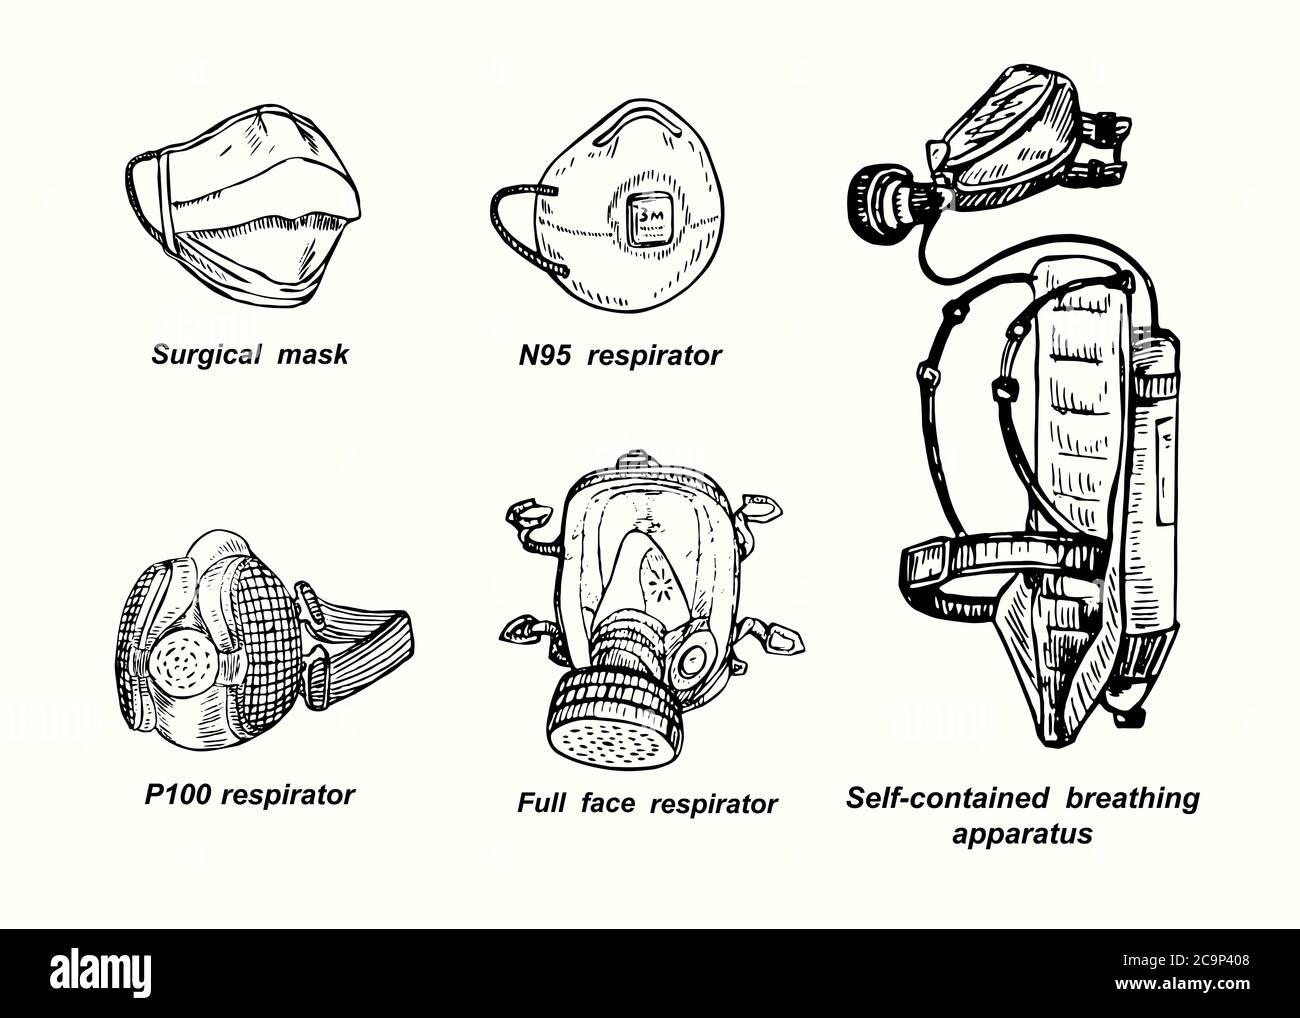 Respirators collection: surgical mask, N95, P100, full face respirator and self-contained breathing apparatus, outline simple doodle drawing Stock Photo